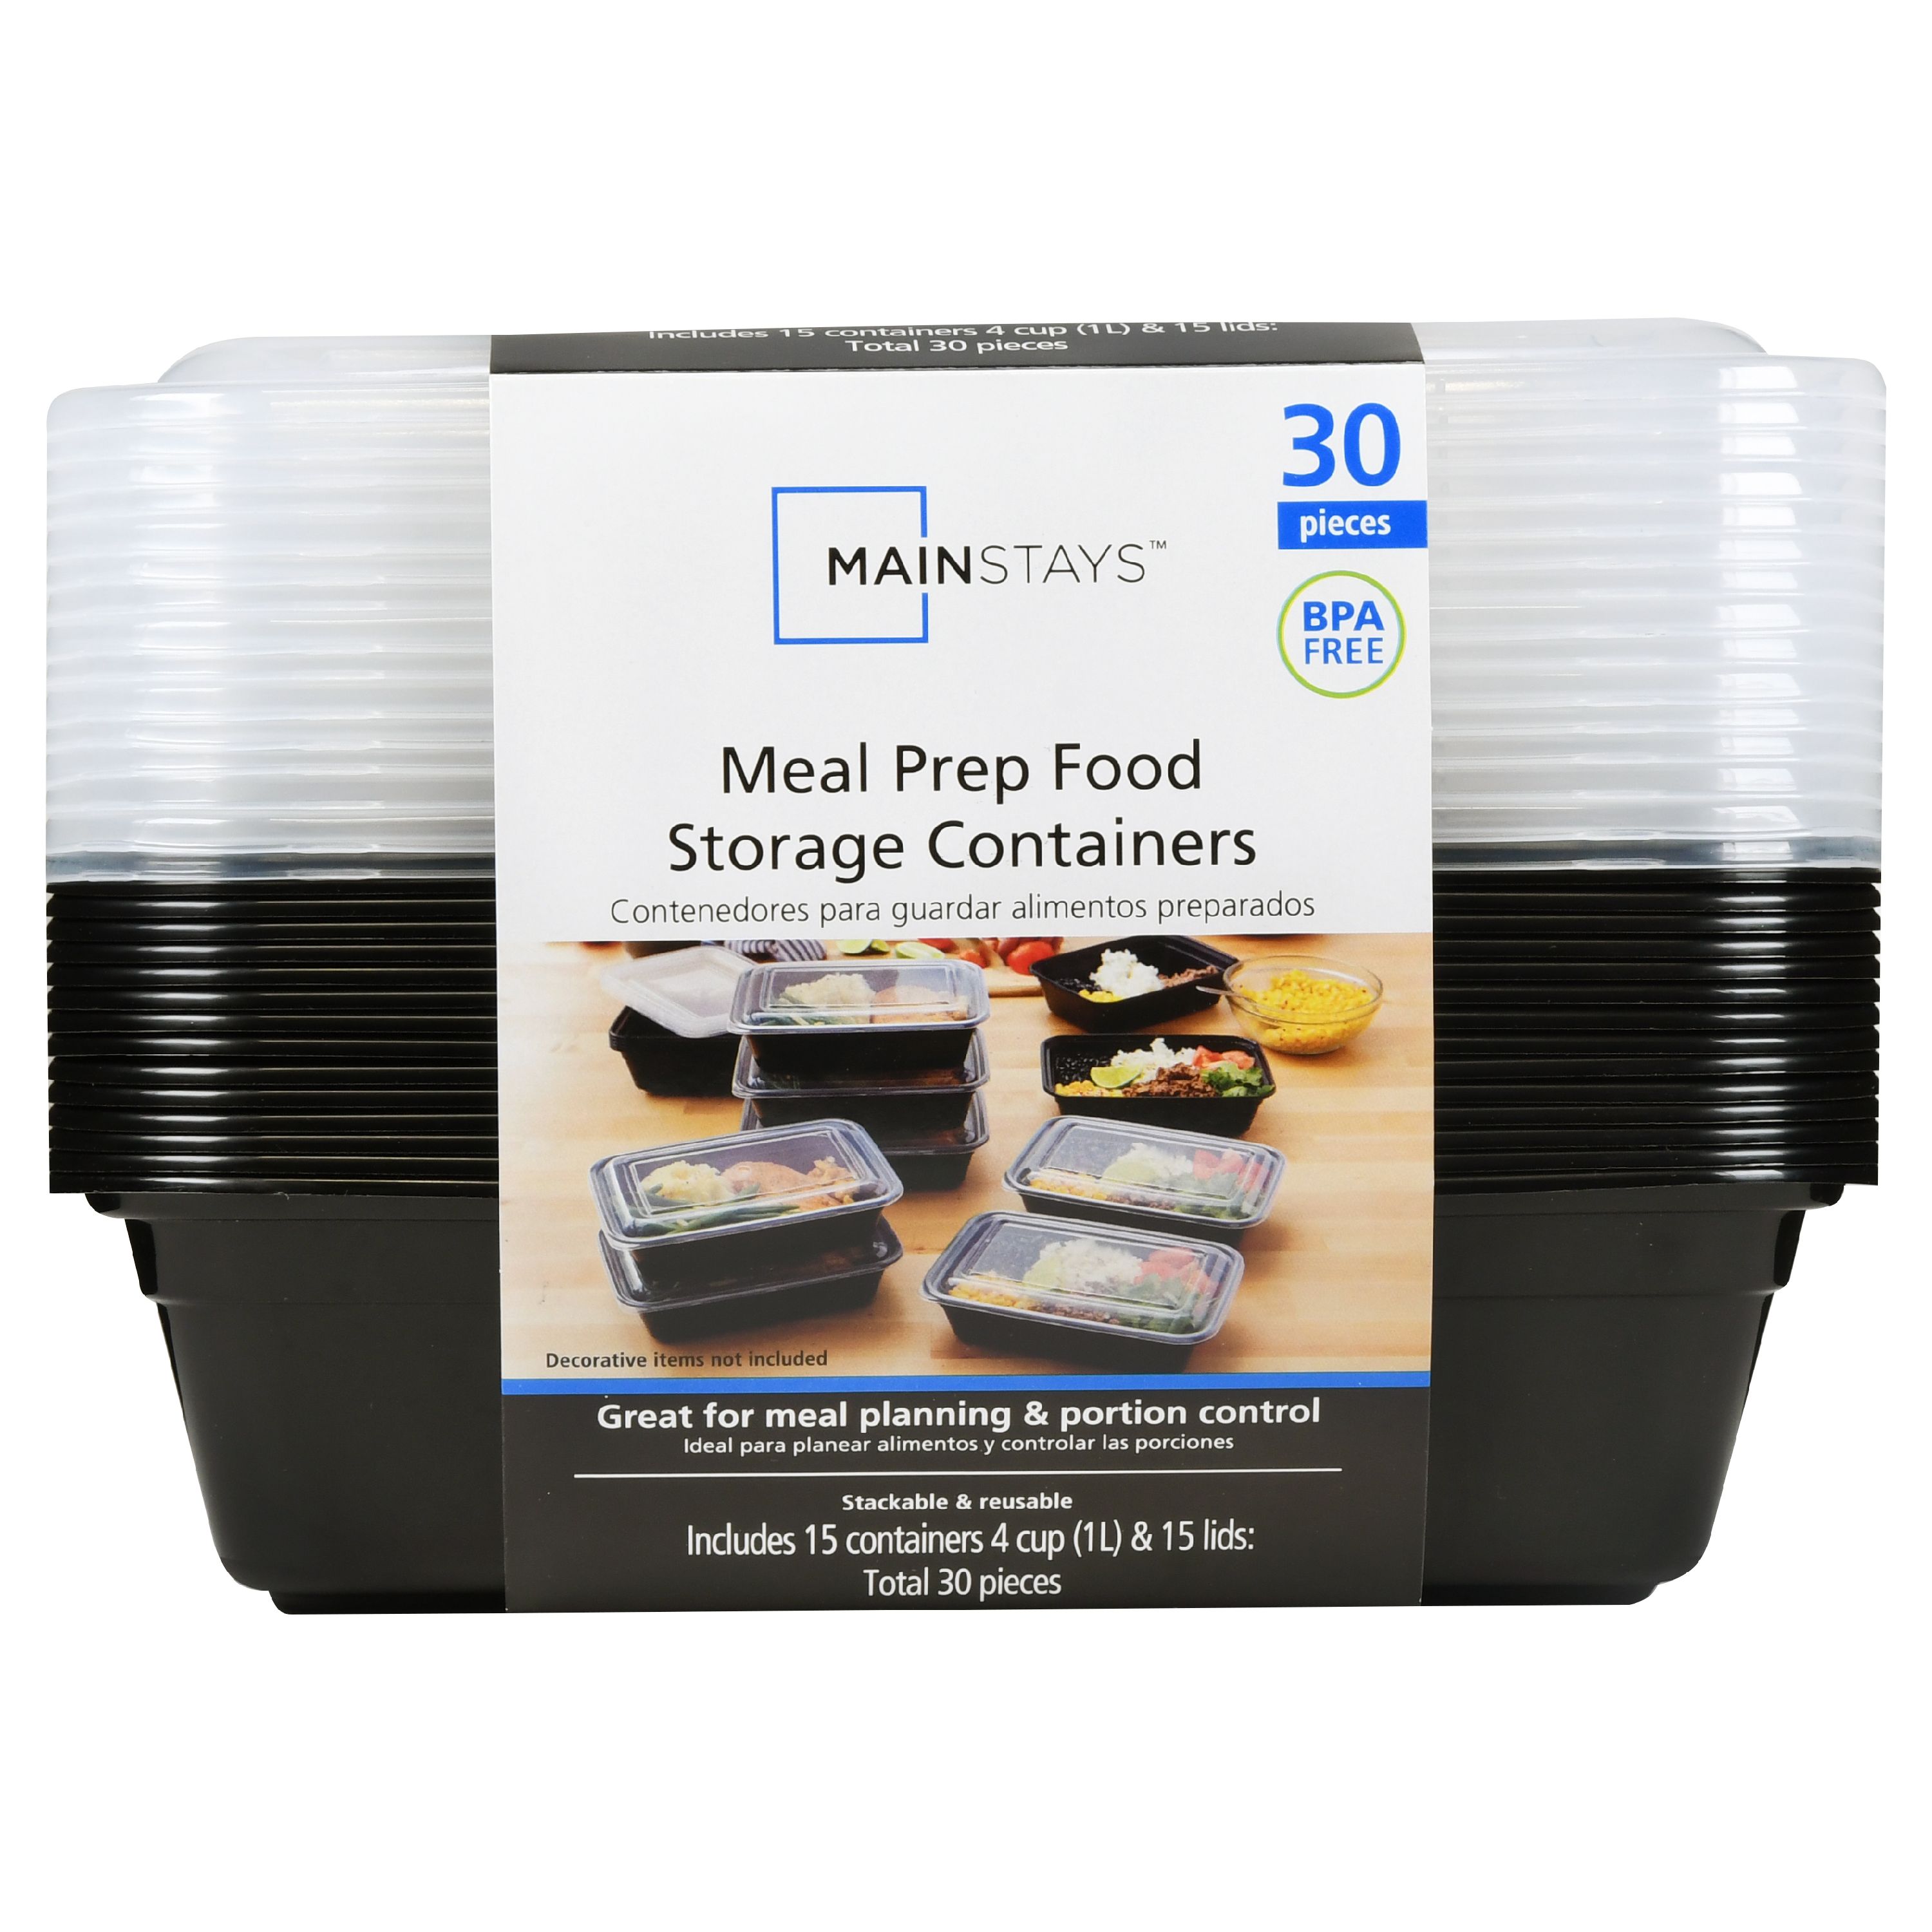 Mainstays Meal Prep Food Storage Containers, 15 Count - image 1 of 3